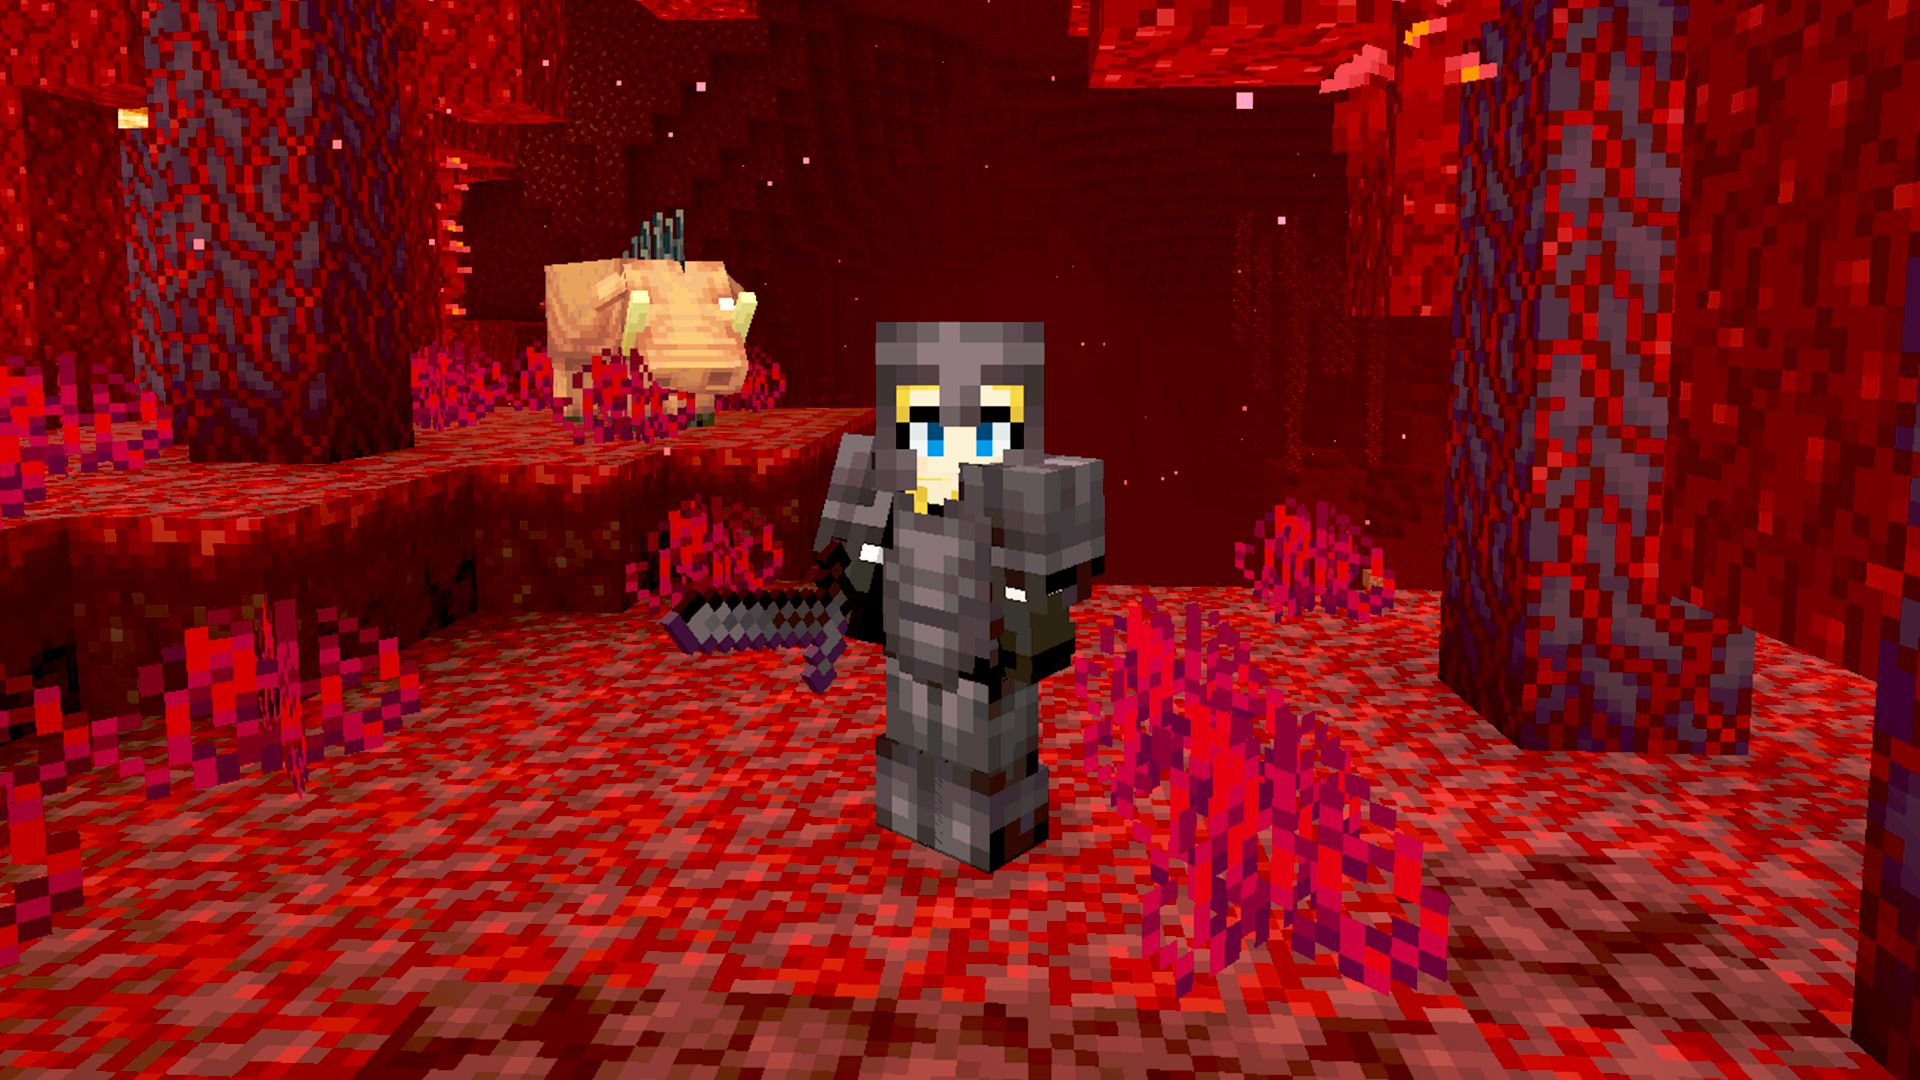 Minecraft netherite: effects and how to make netherite